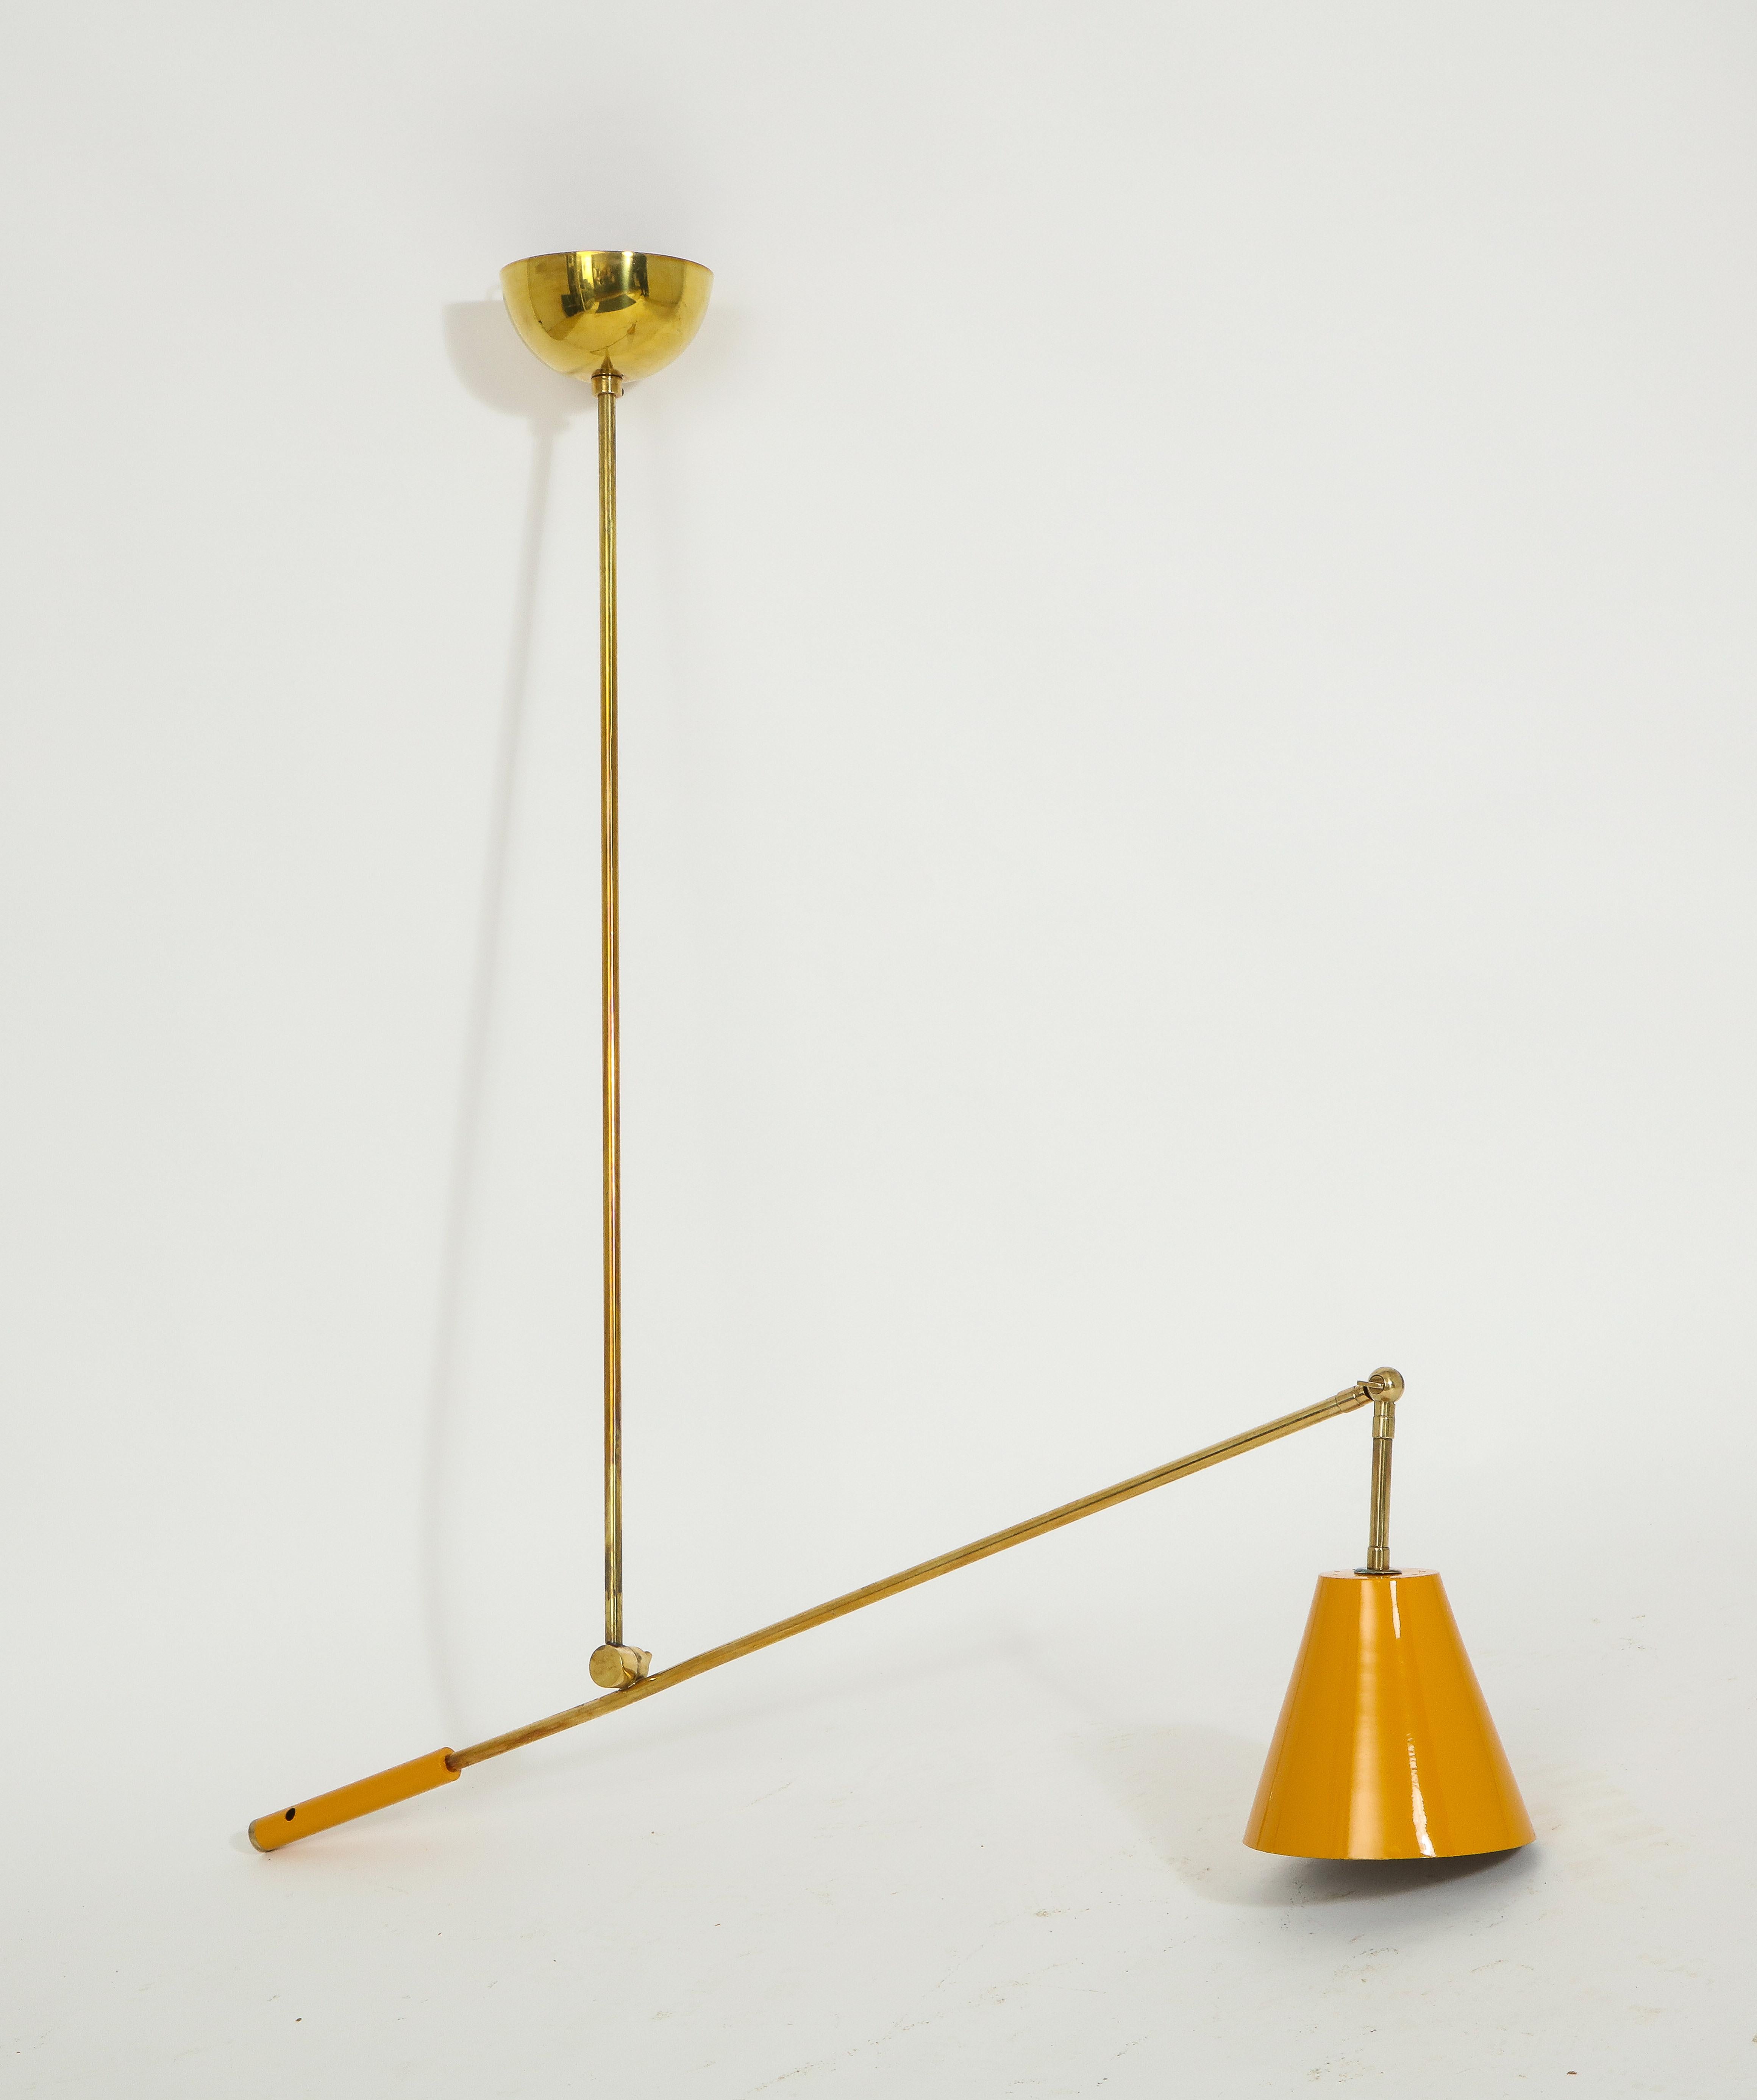 Roberto Matta for Arredoluce Adjustable Ceiling Fixture in Brass, Italy, 1950 In Good Condition For Sale In New York, NY